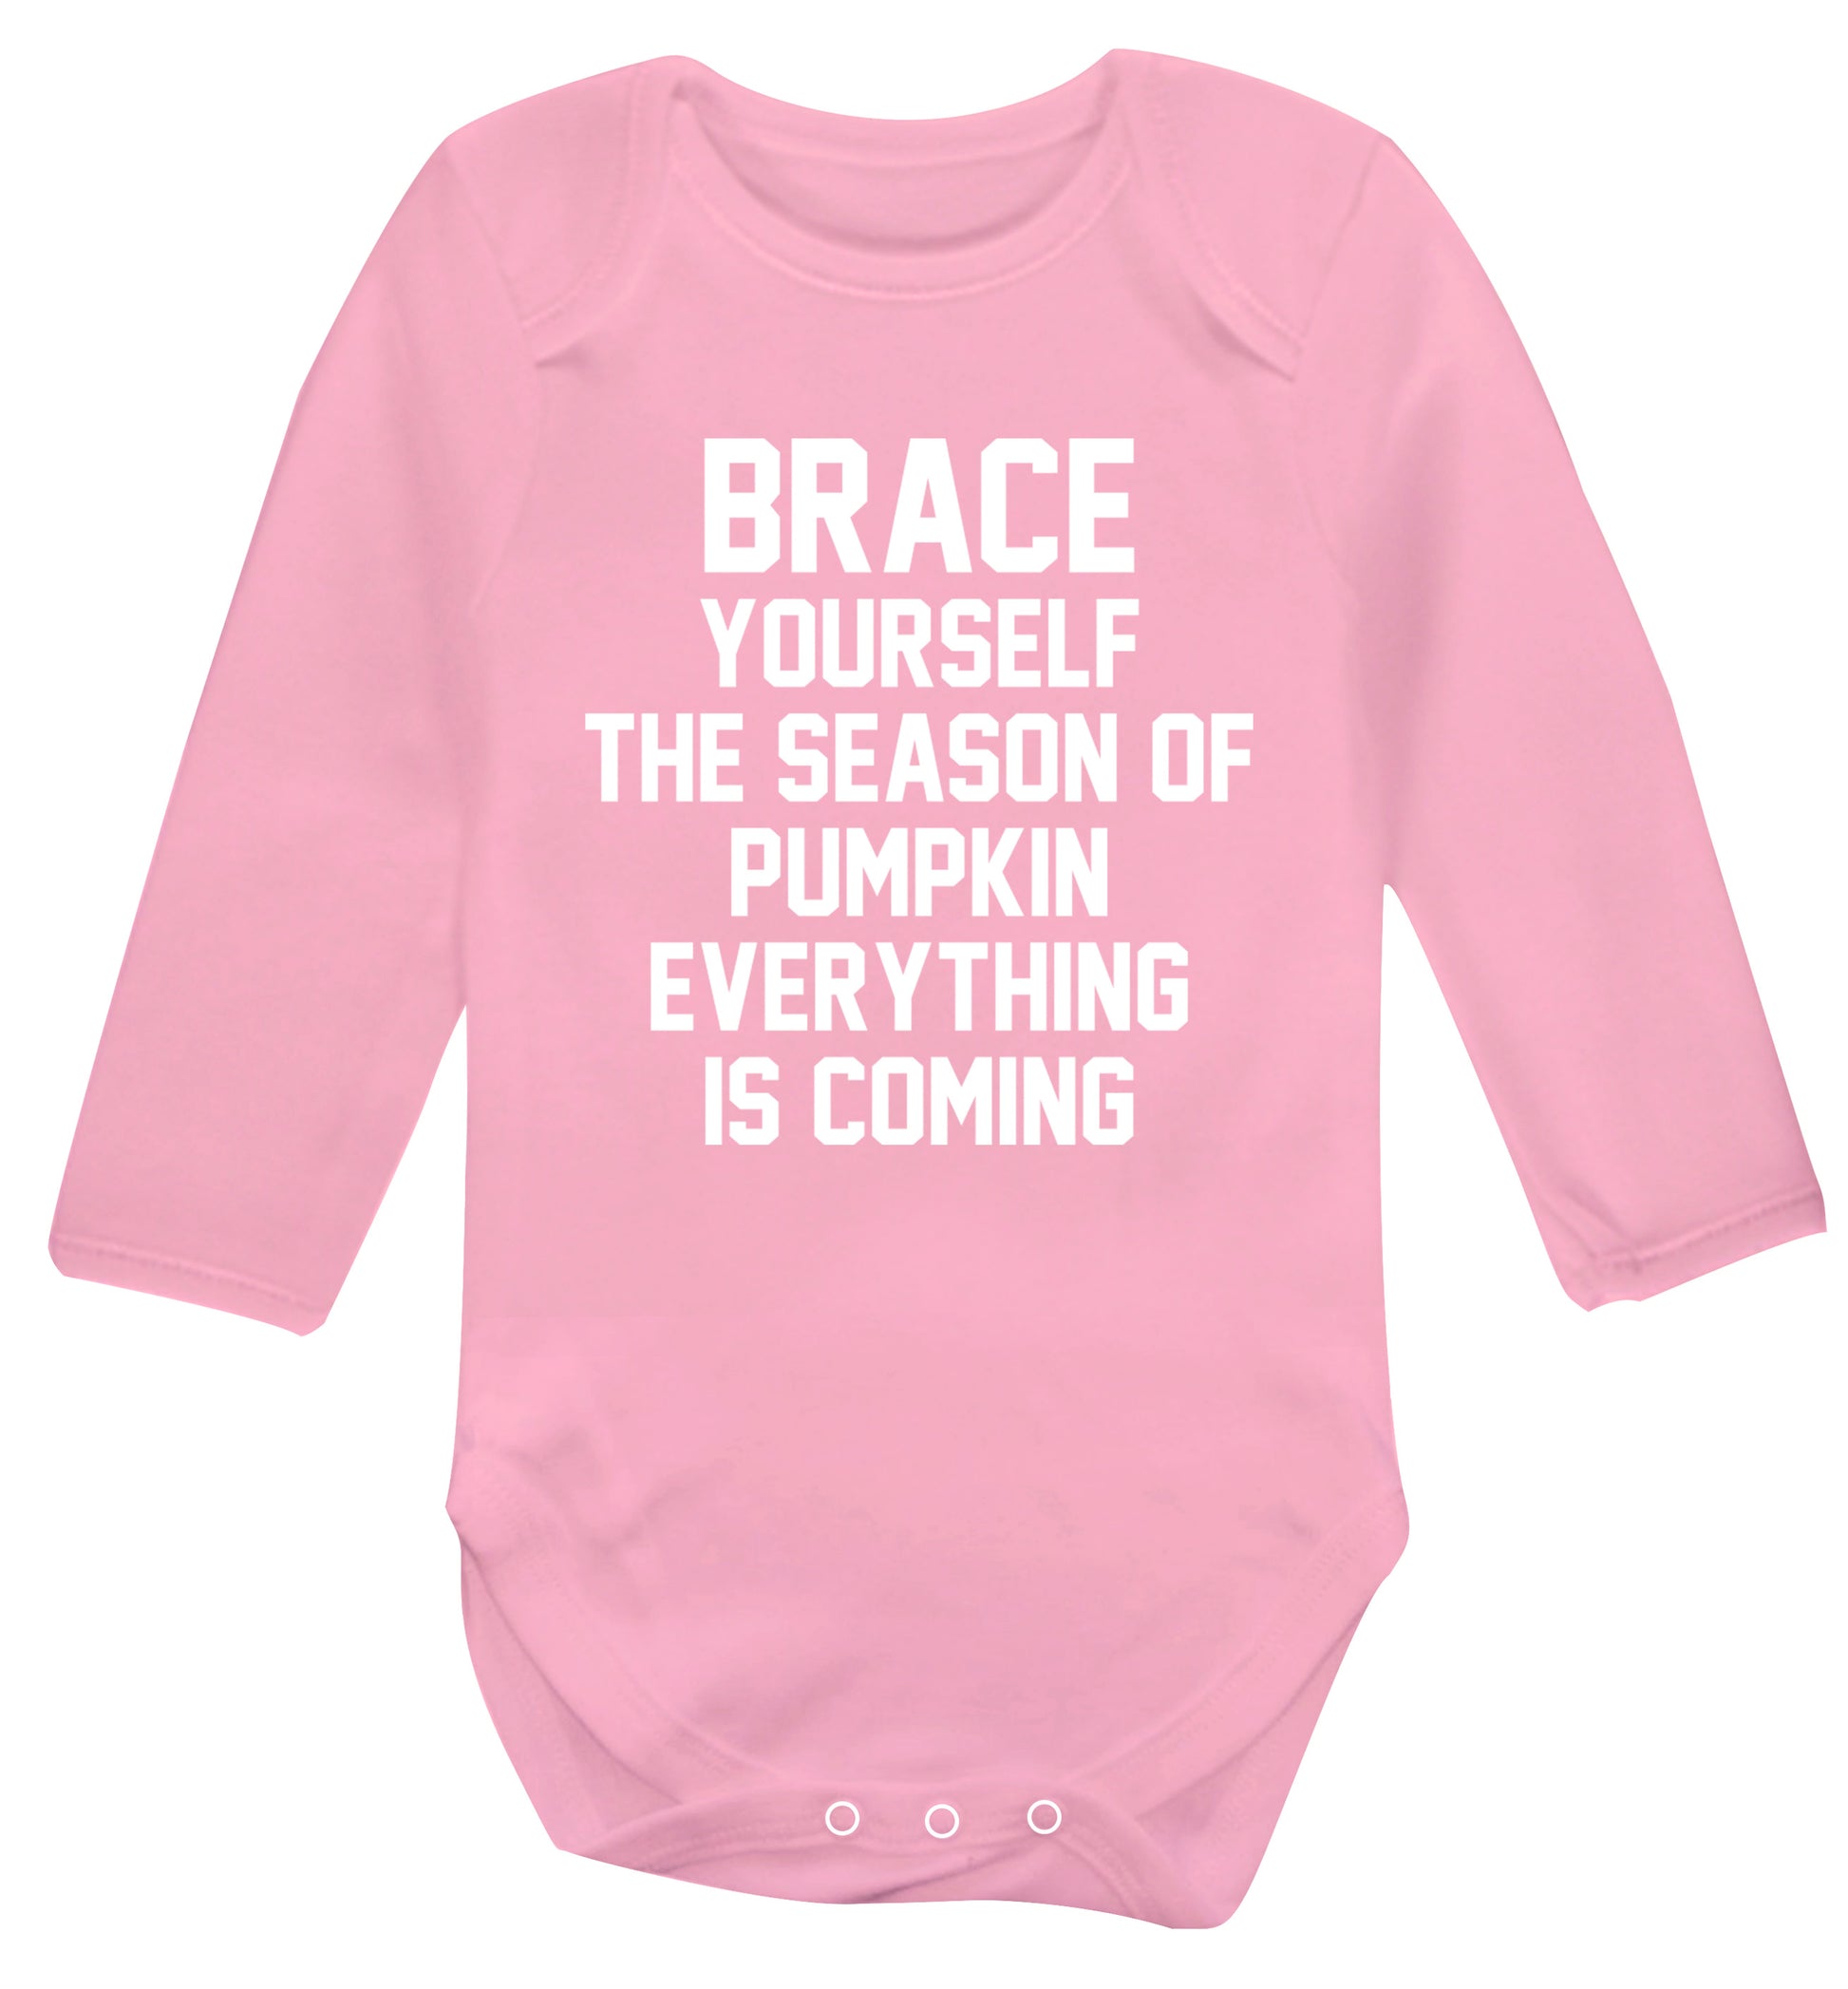 Brace yourself the season of pumpkin everything is coming Baby Vest long sleeved pale pink 6-12 months